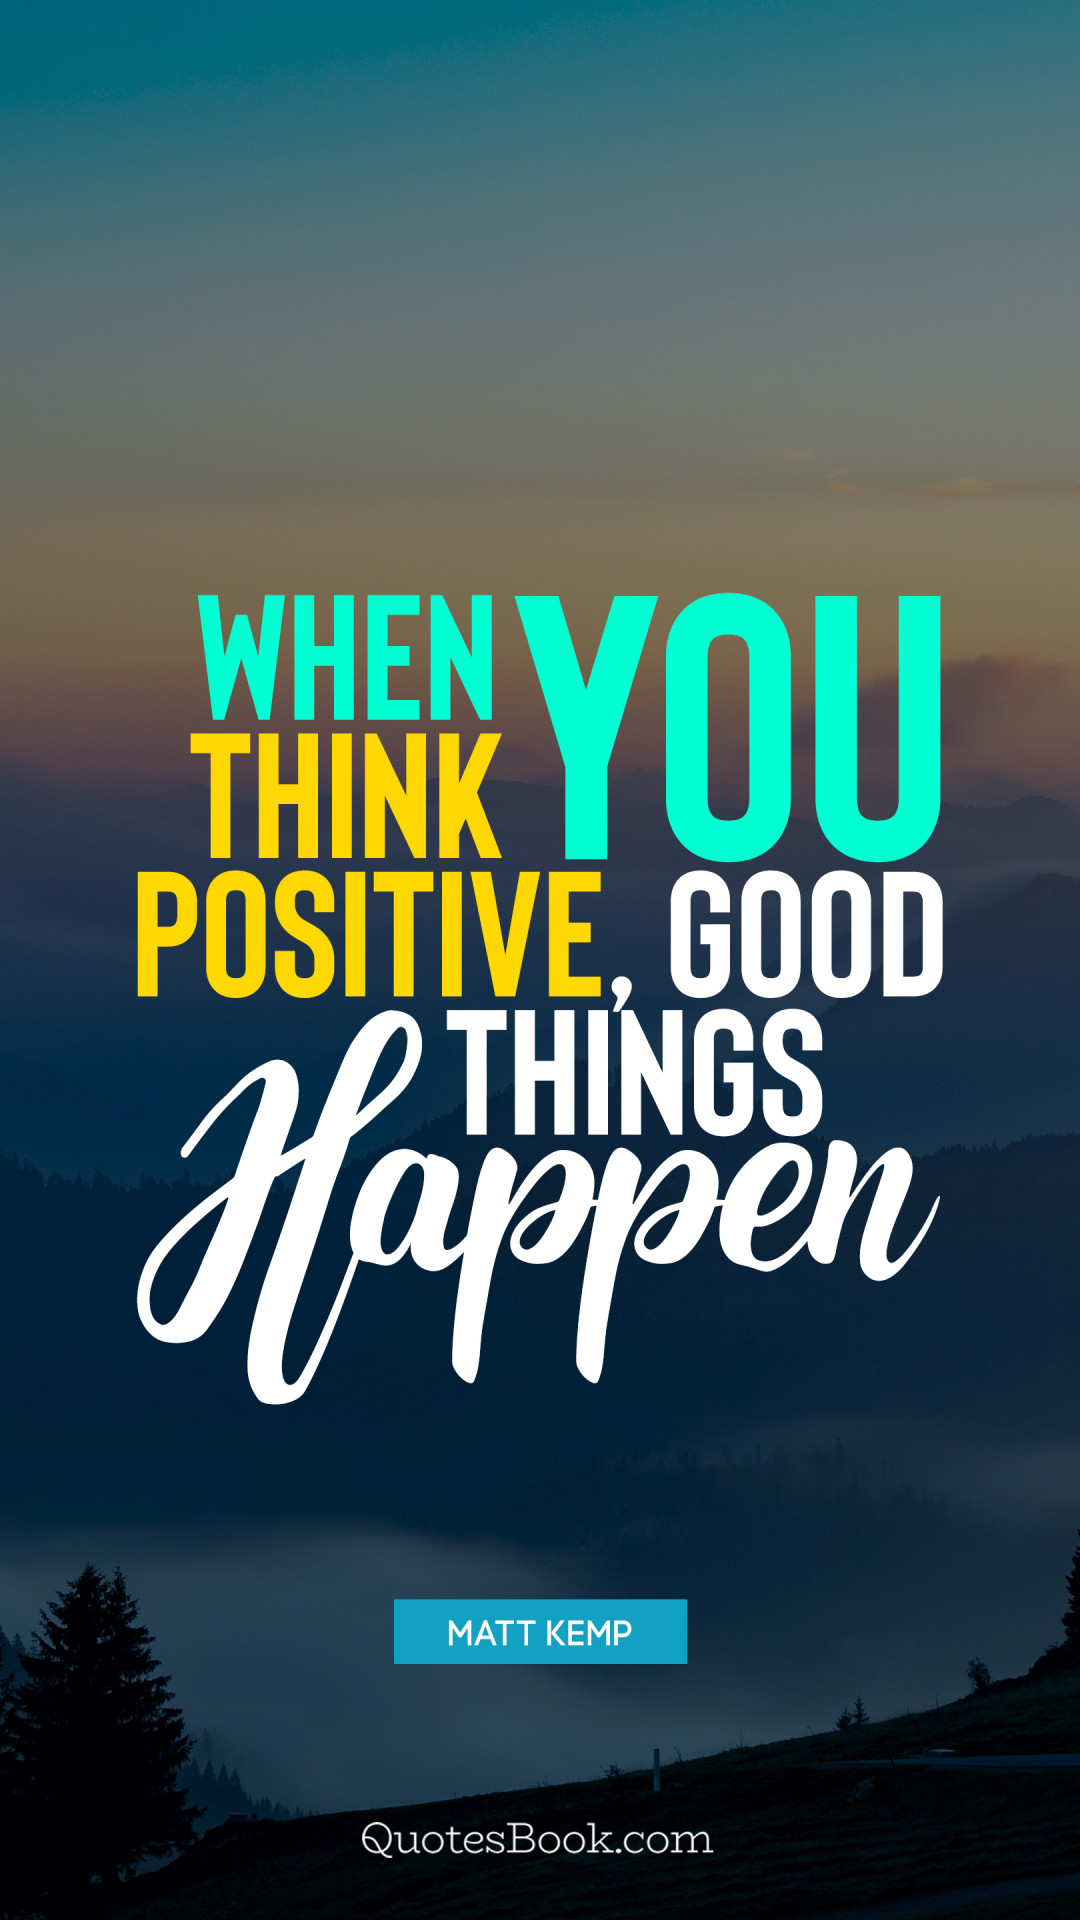 When you think positive, good things happen. - Quote by Matt Kemp